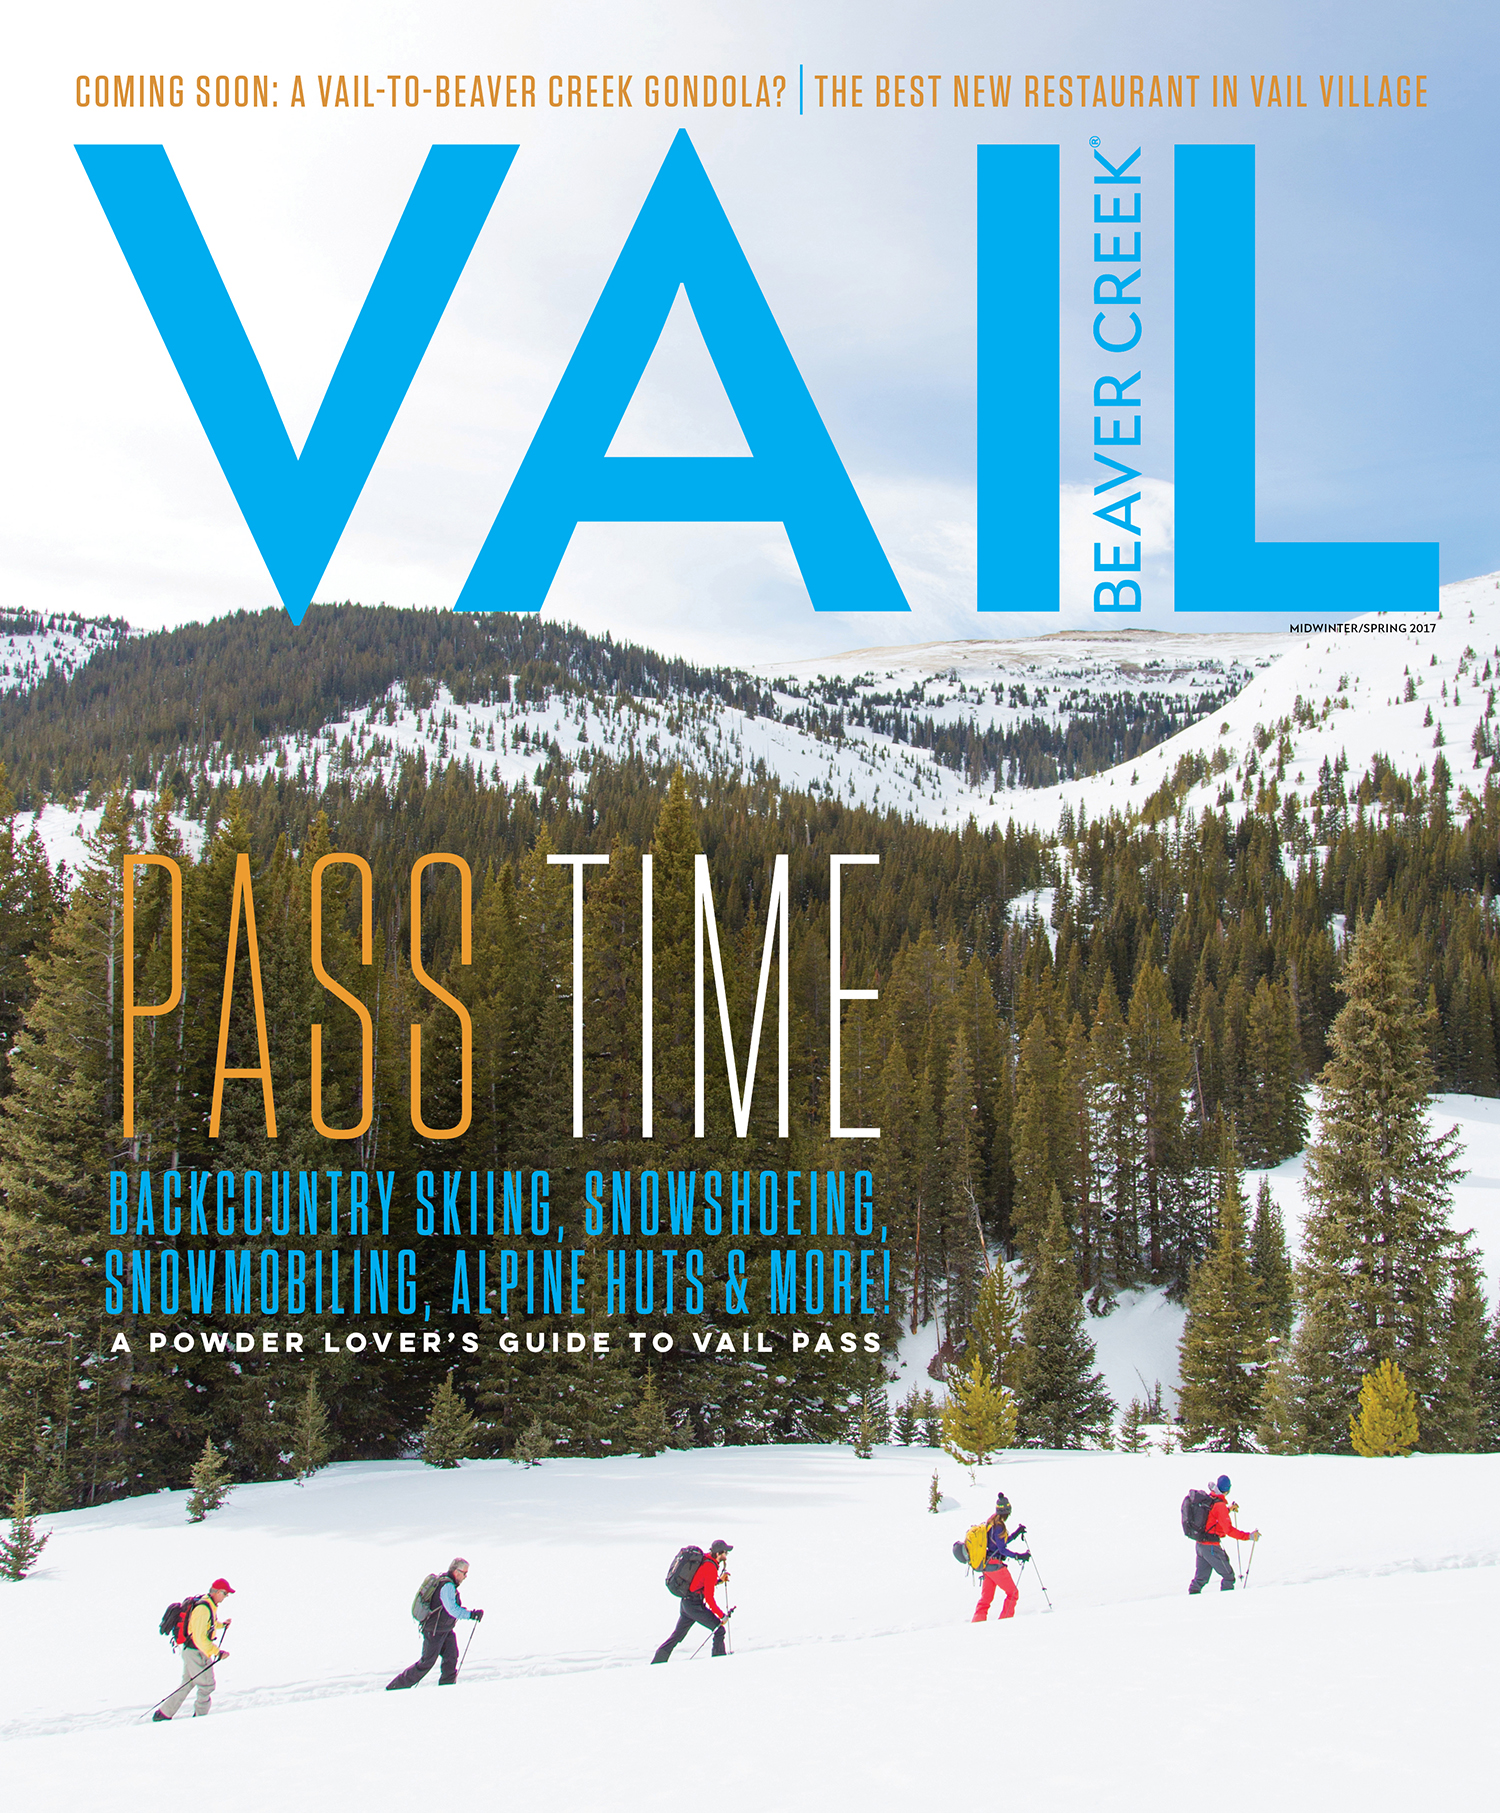 Vail_cover_1.jpg